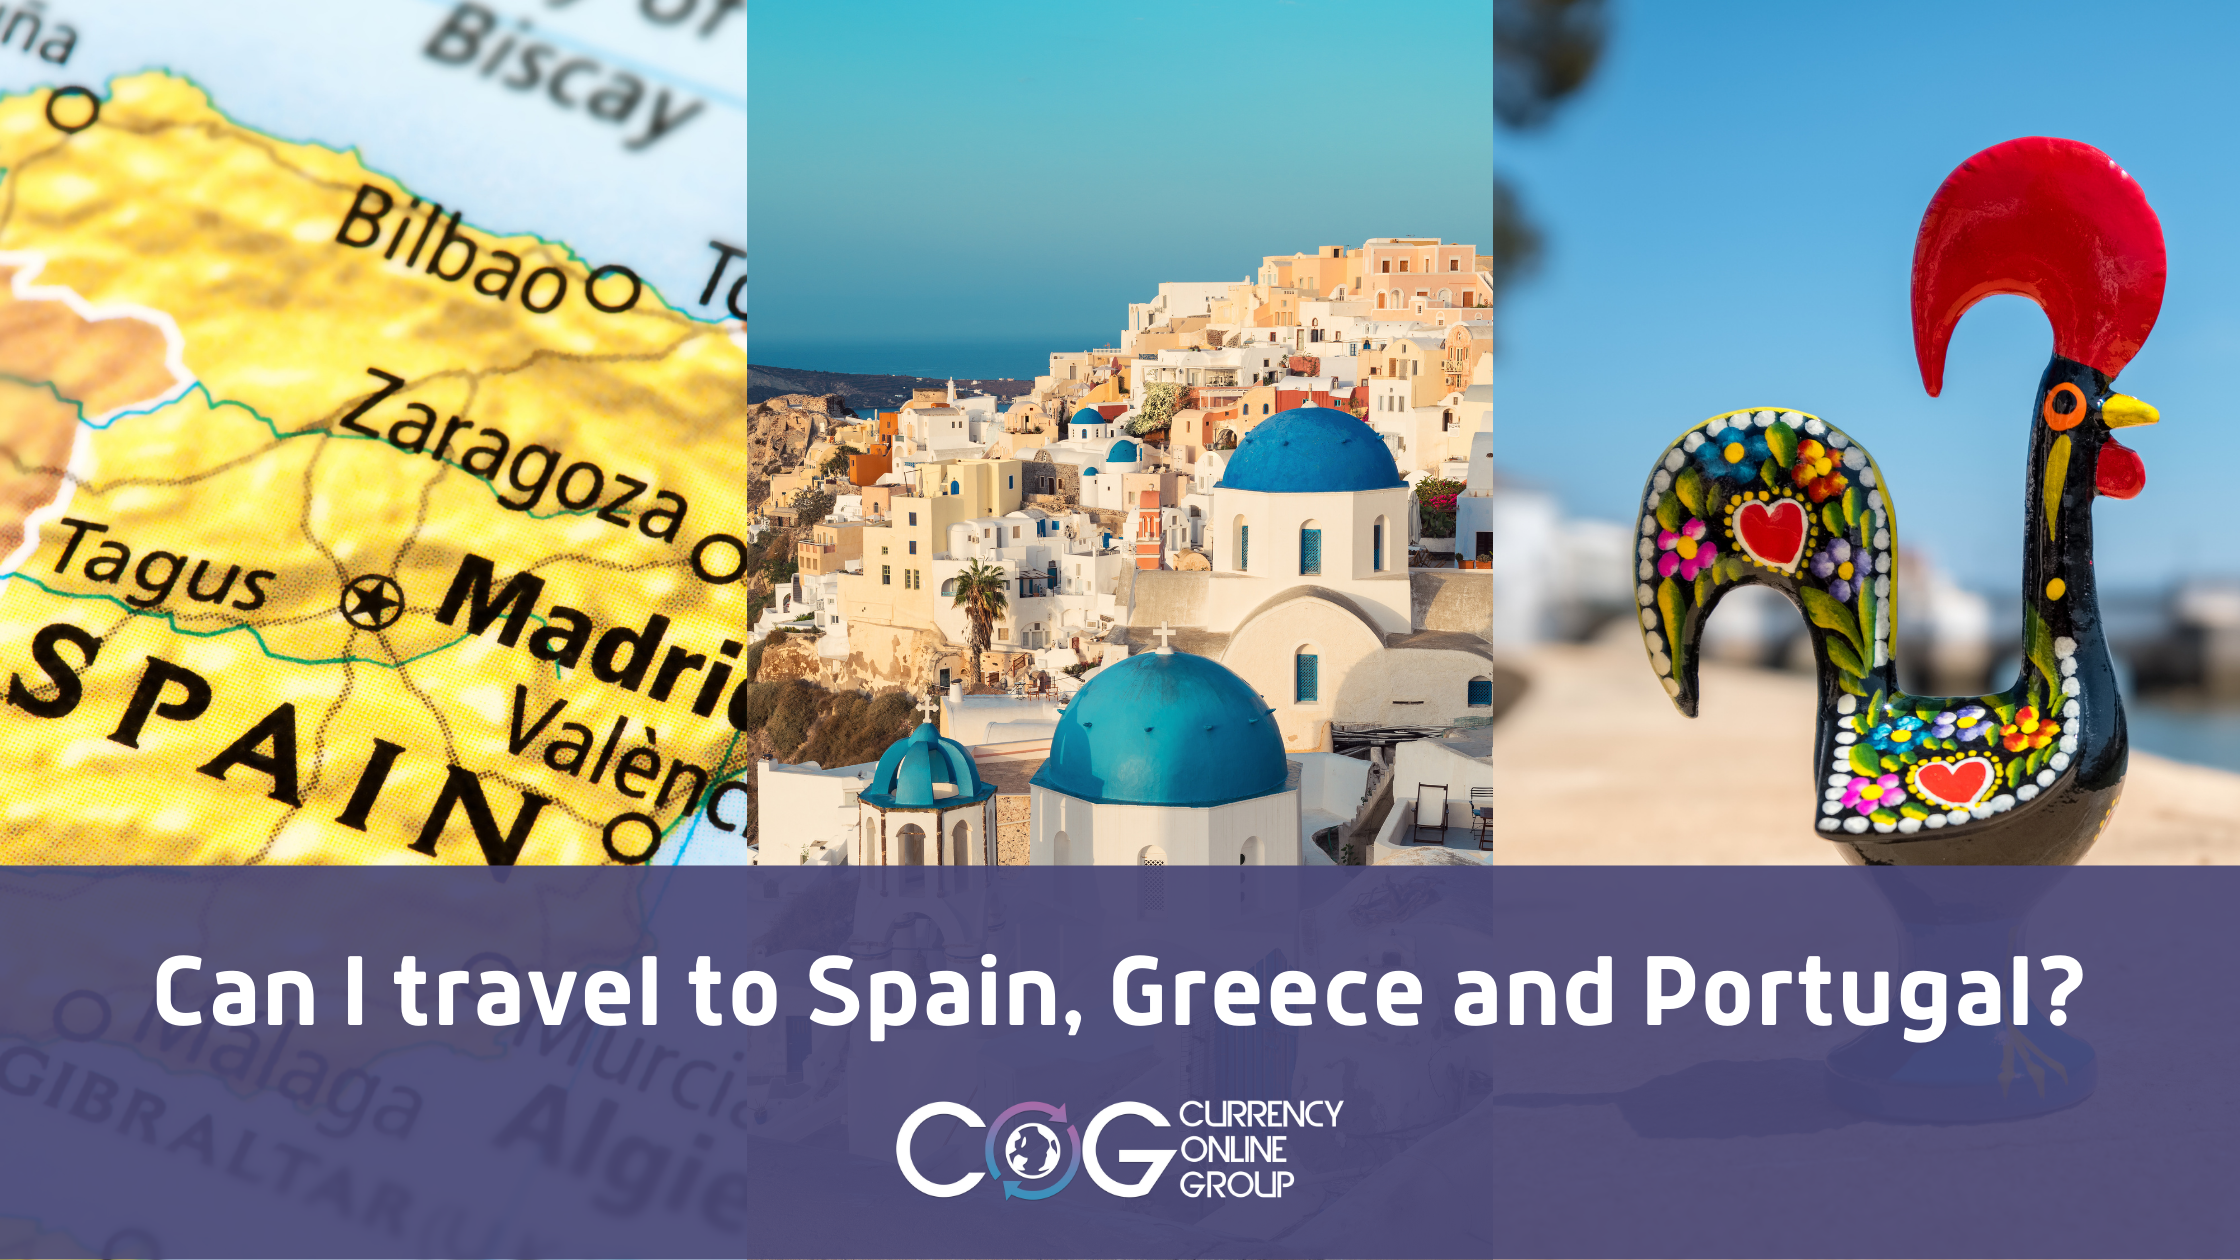 Can I travel to Spain, Greece and Portugal?